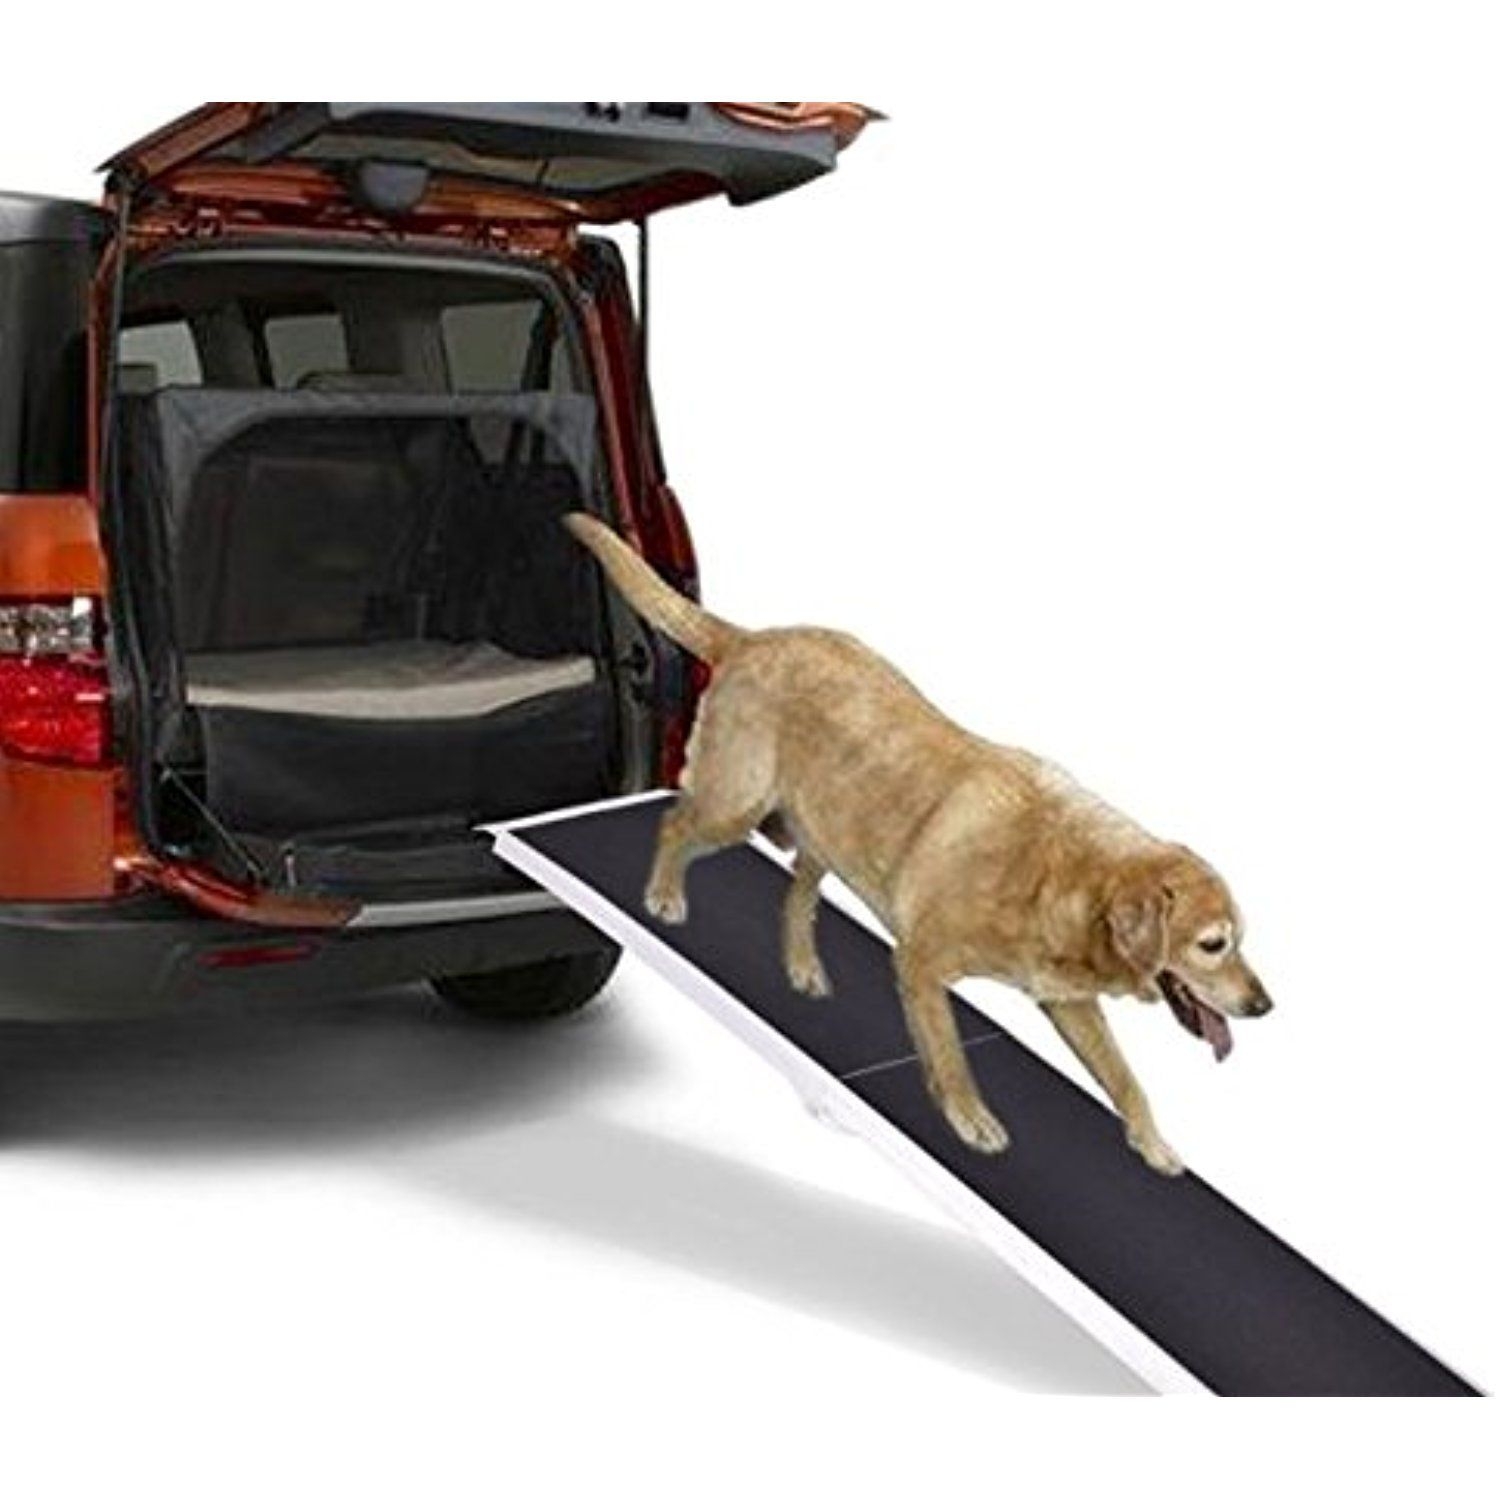 Ramp Adjustable Height 29”- 35” for Car Car Dog Ramp Stair Ladder 6 steps Nonslip Lightweight Aluminum Telescoping Pet Ramp for Car Boot High Beds Folding Dog Ramp for Large Dogs SUV Truck 